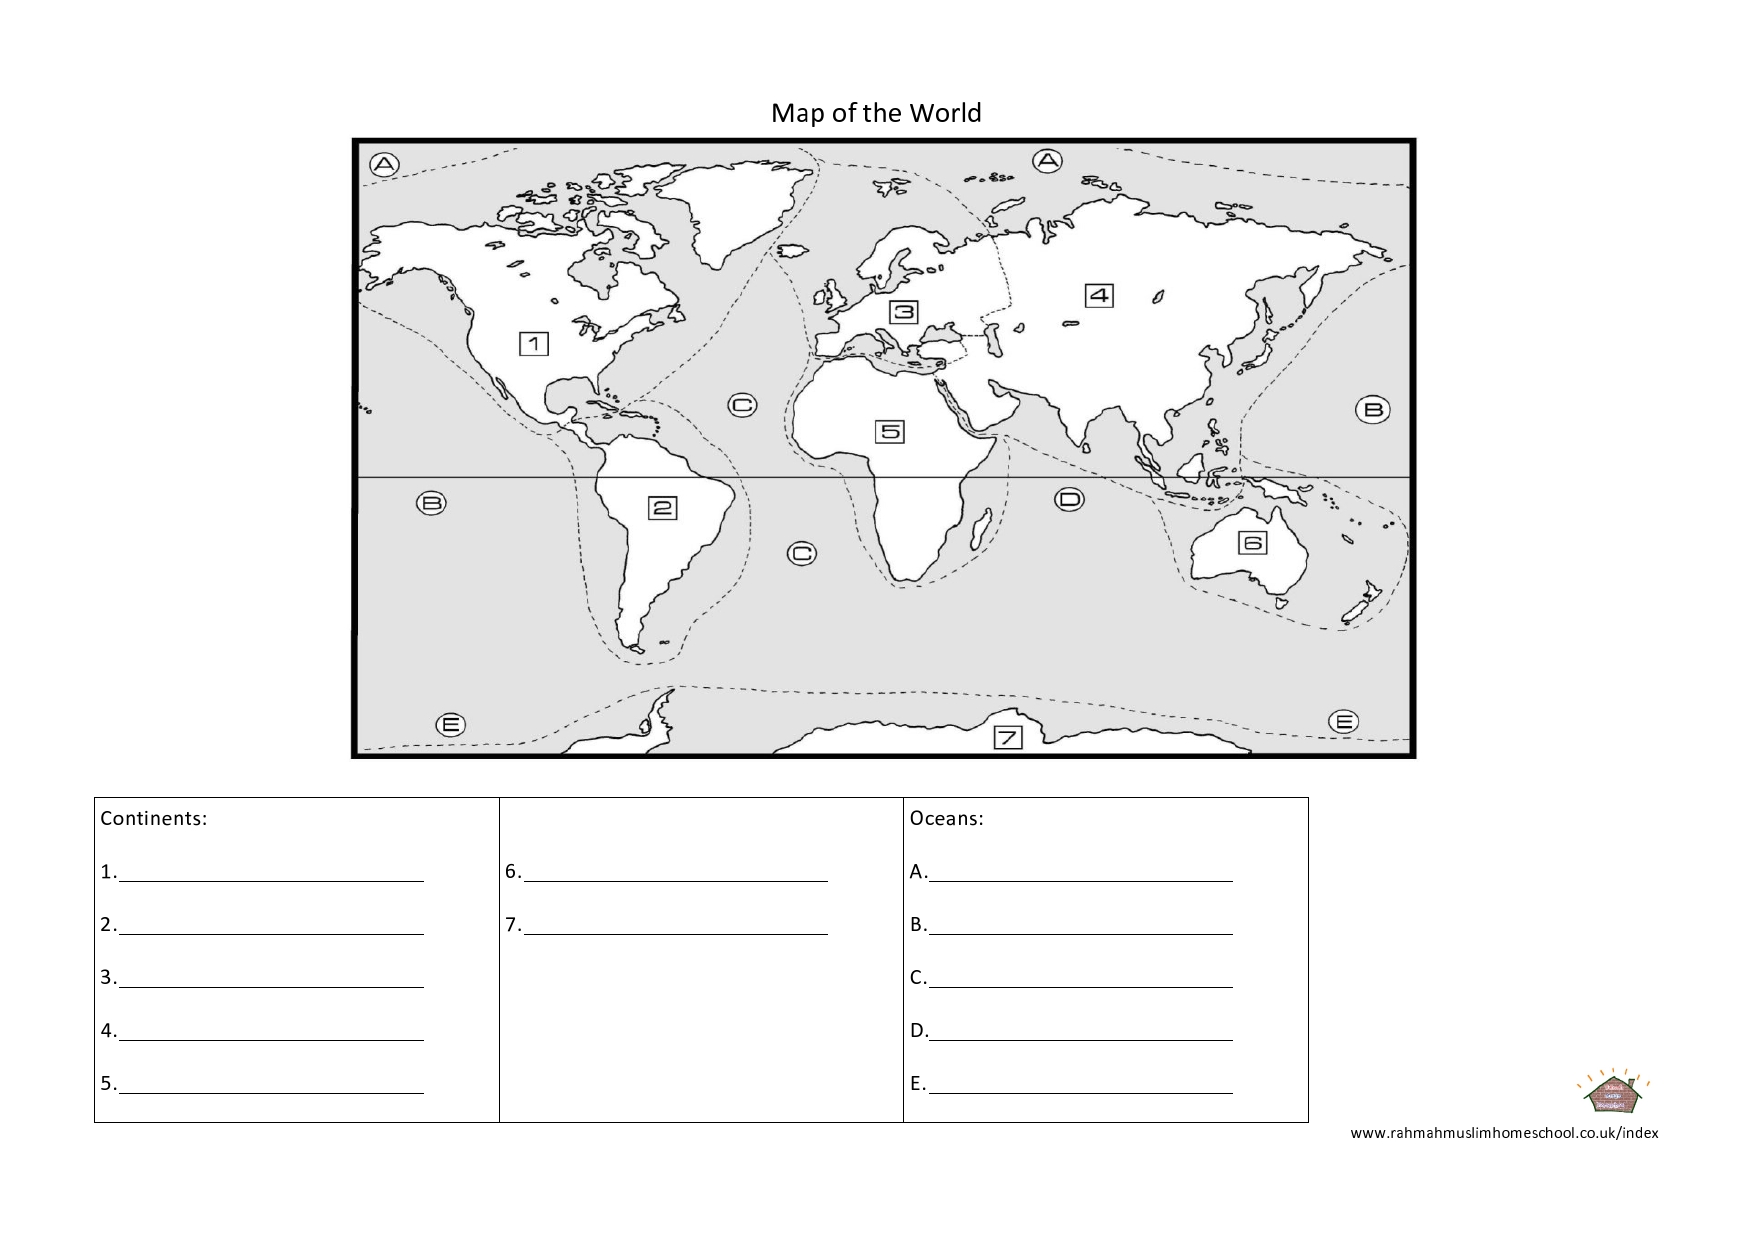 7 Continents and Oceans Worksheets Image